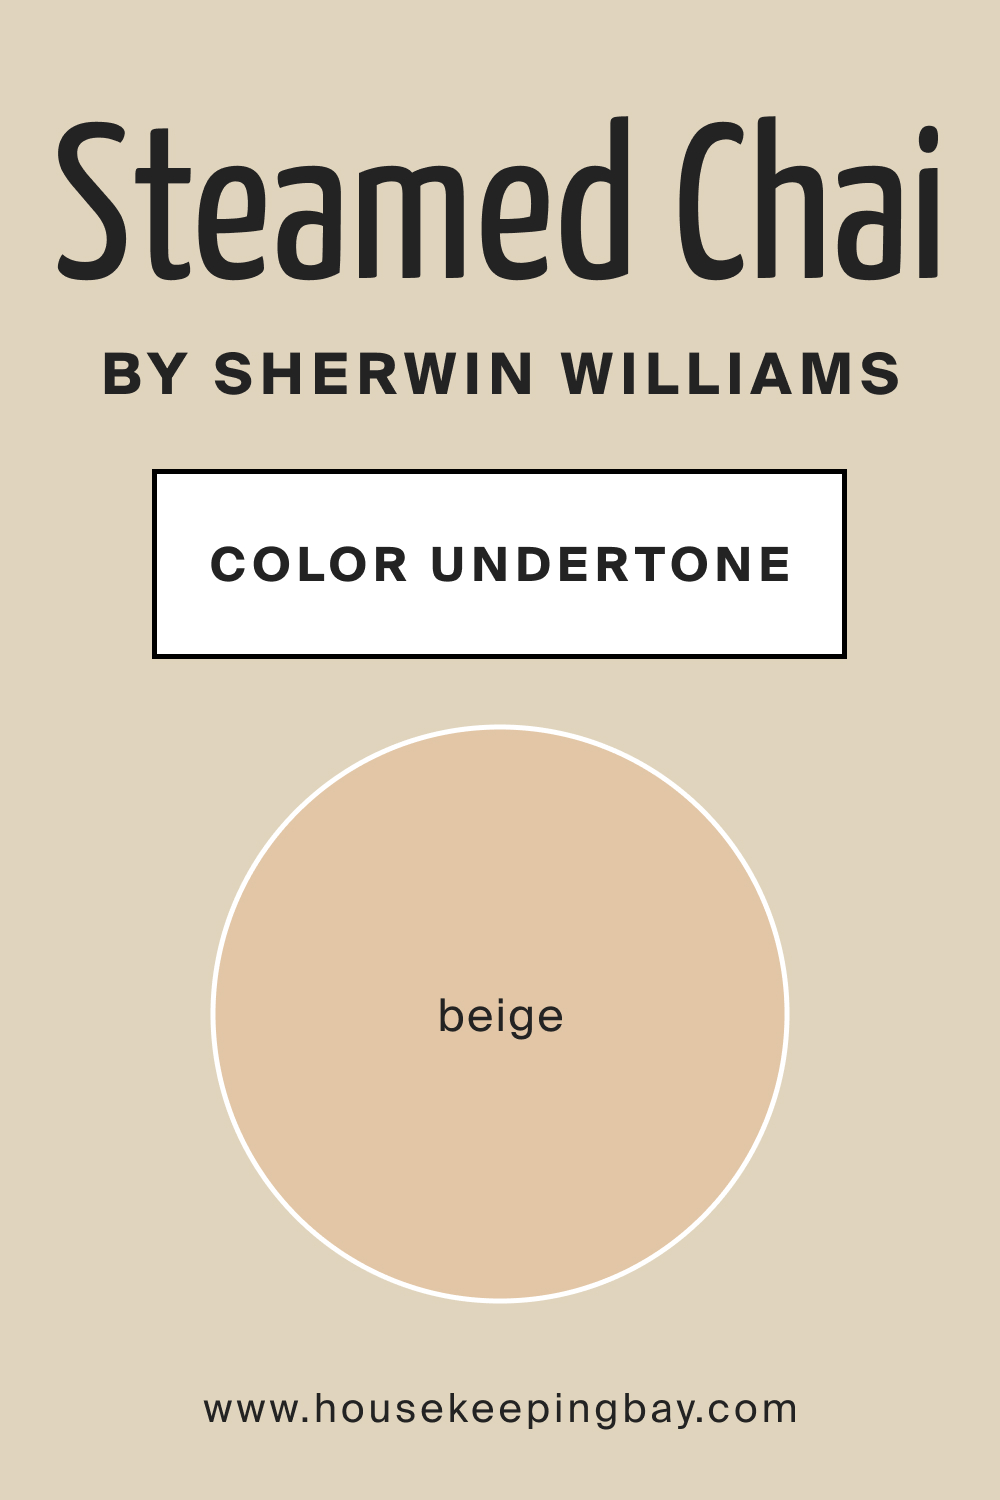 SW 9509 Steamed Chai by Sherwin Williams Color Undertone